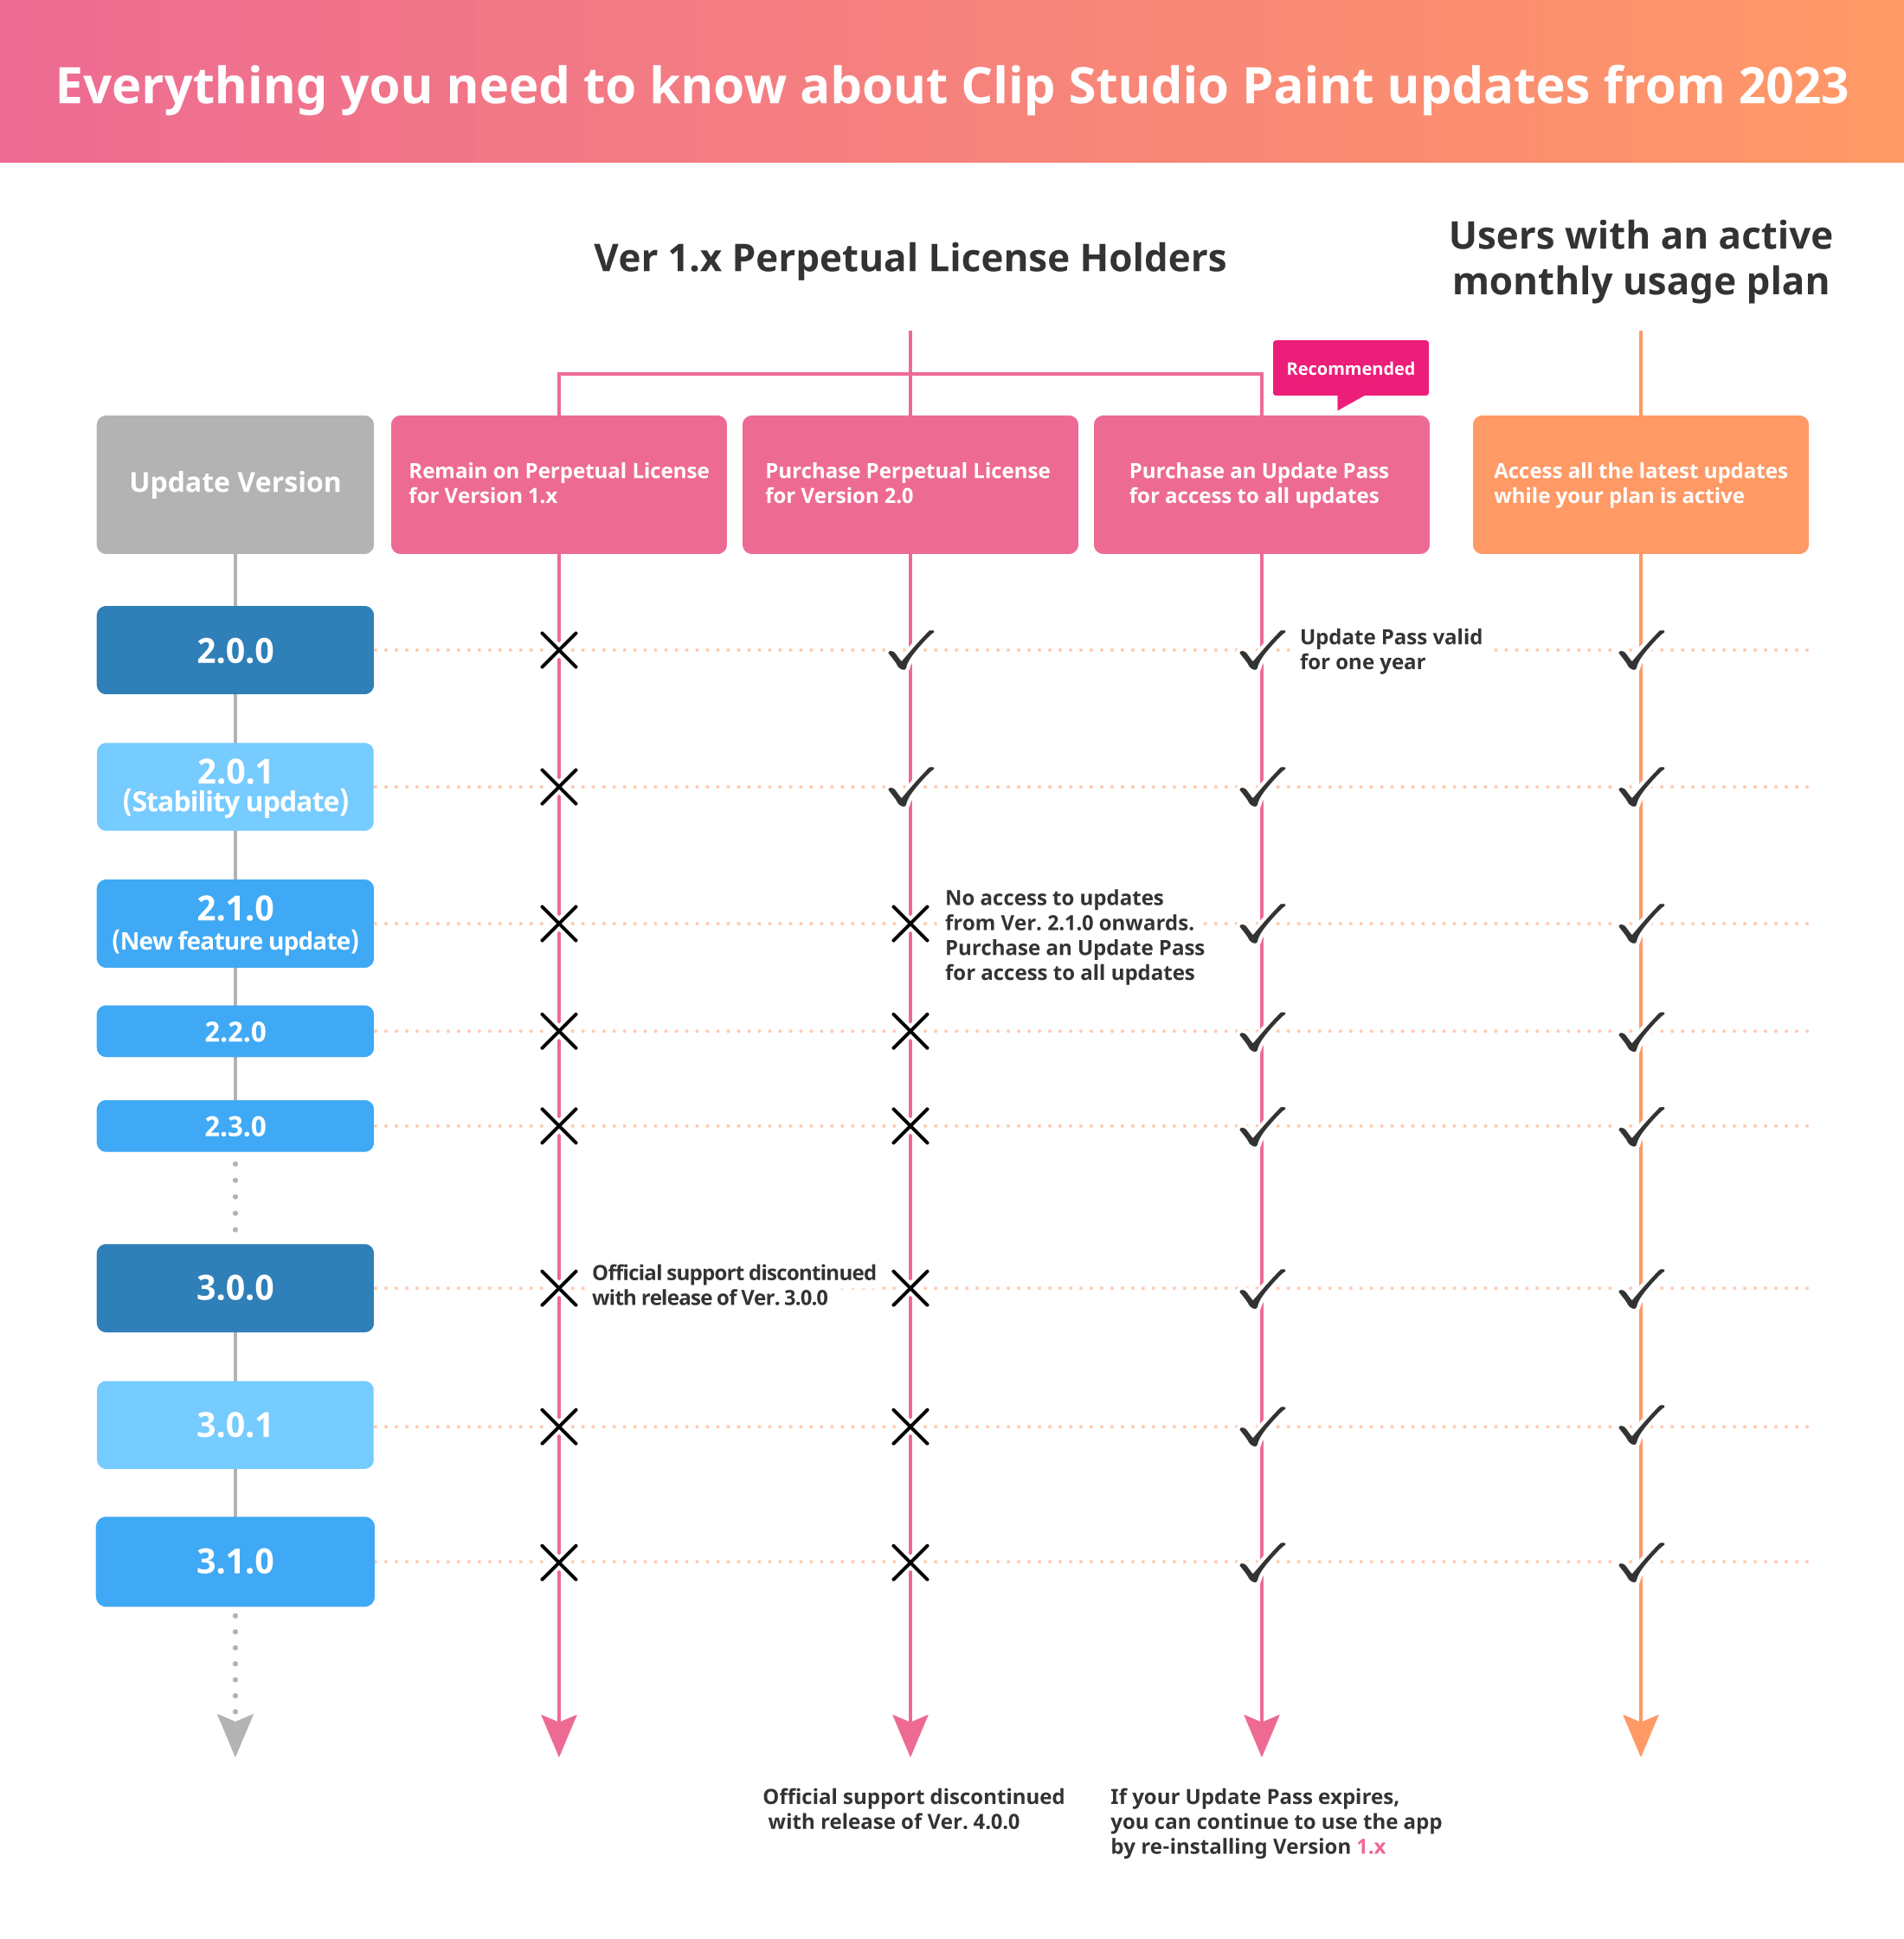 End-of-life flow chart from Celsys's announcement about Clip Studio Paint